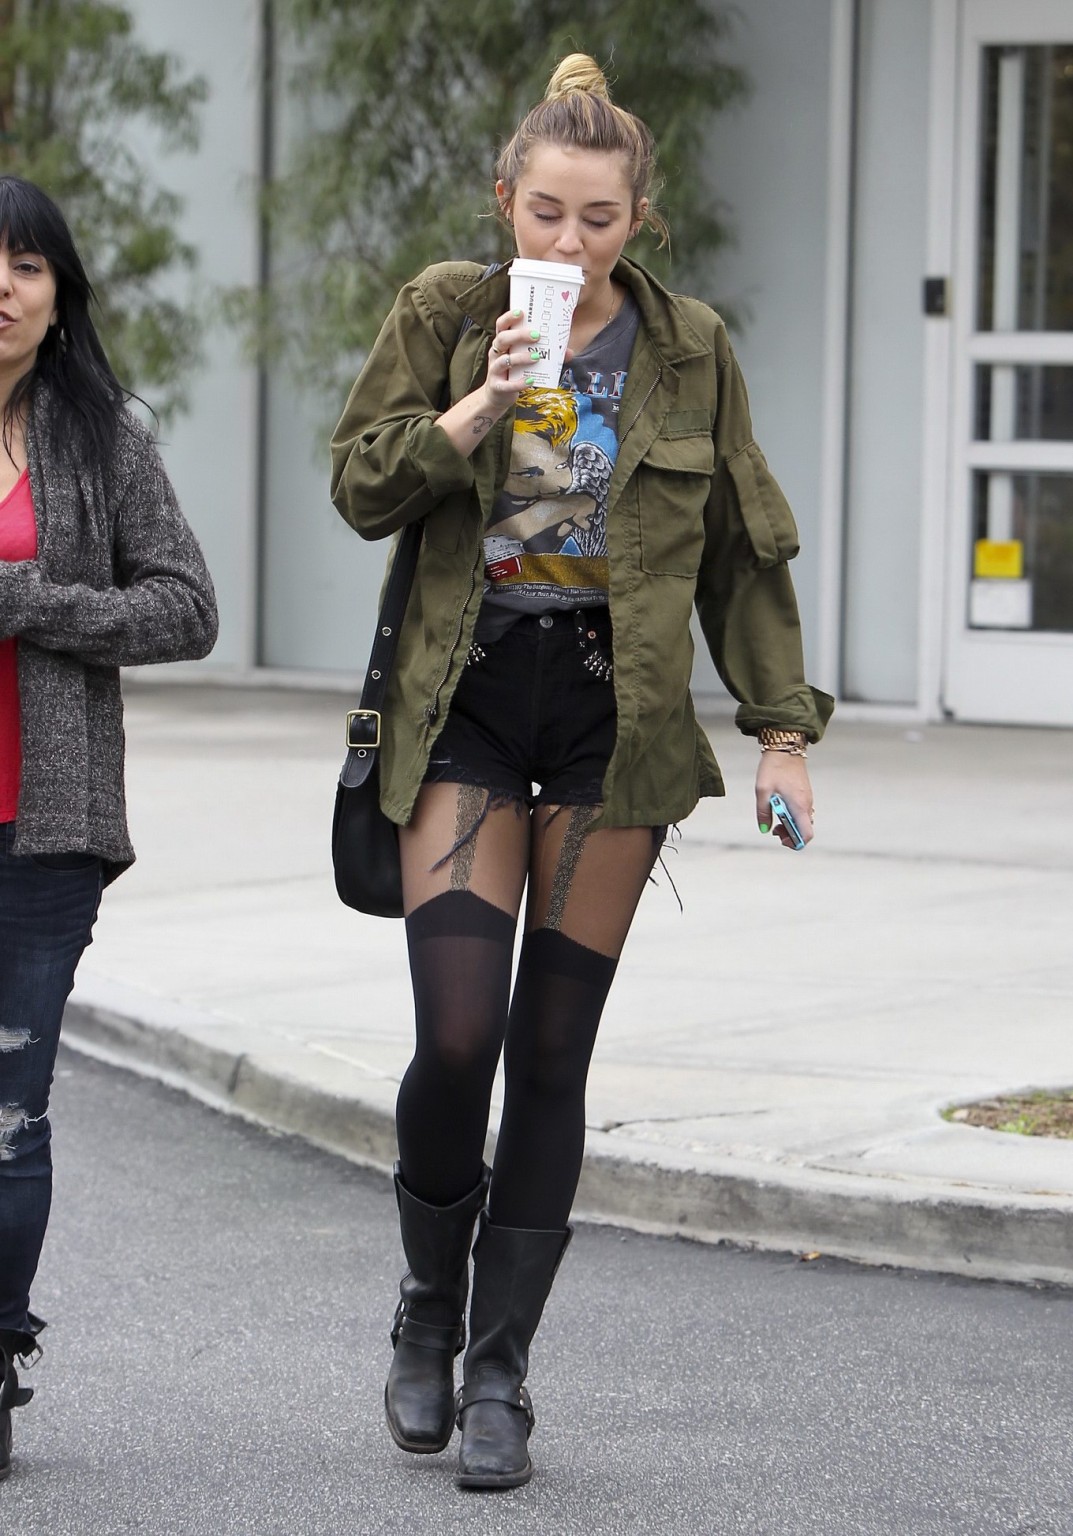 Miley Cyrus leggy wearing stockings  biker boots outside Starbucks in Hollywood #75274251